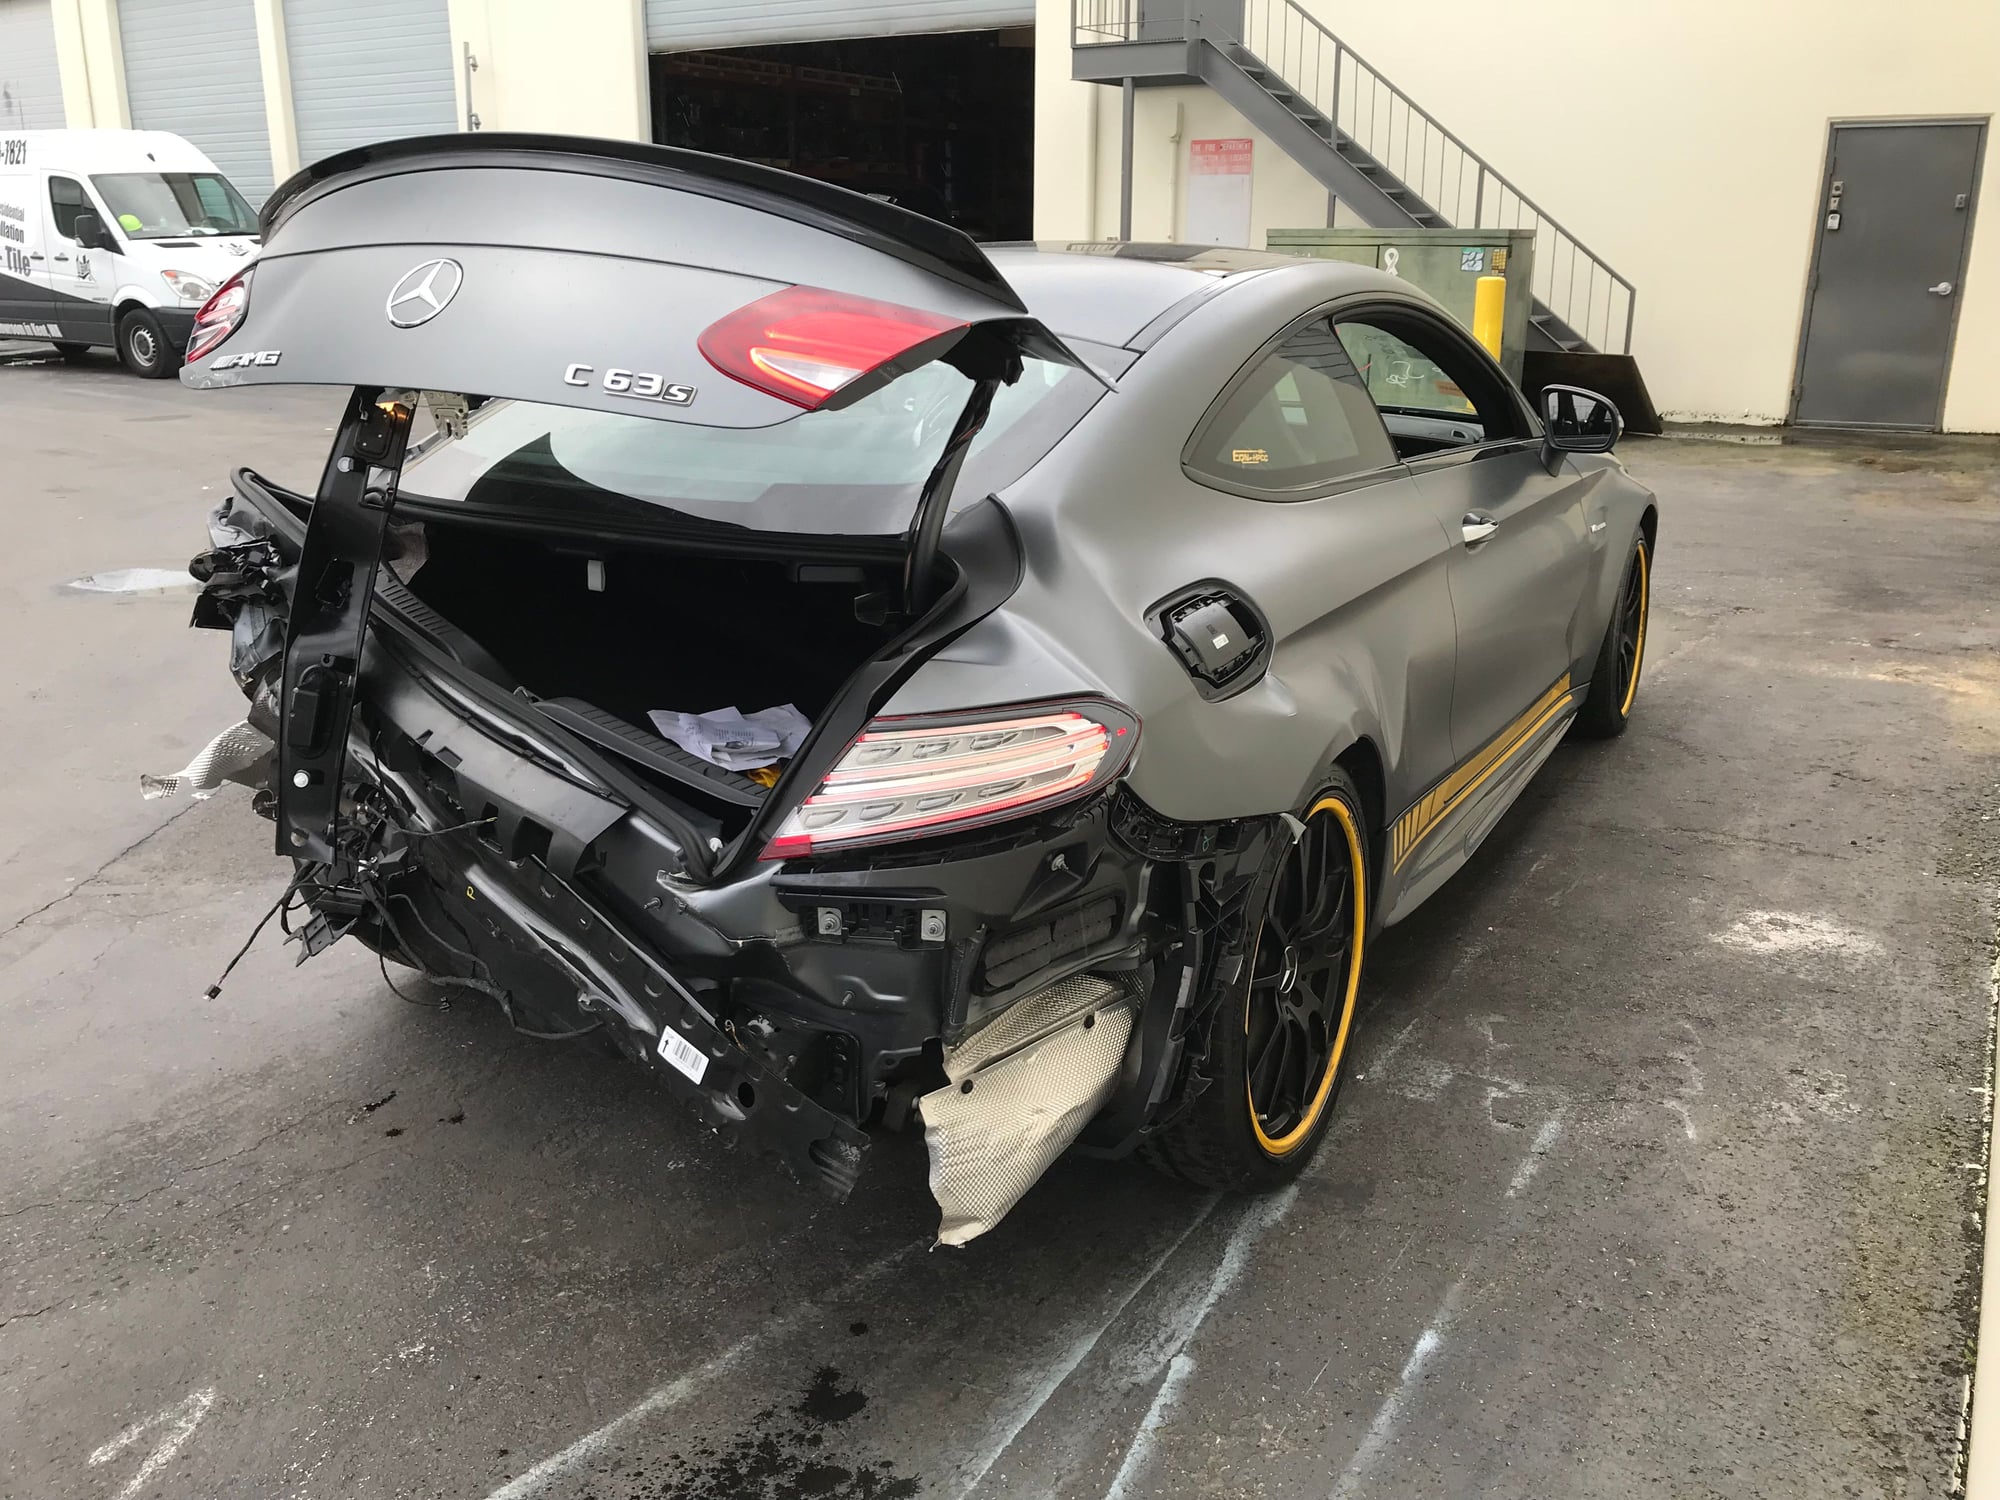 2010 Mercedes-Benz SLK350 - 2017 Mercedes C63S Edition 1 PARTING OUT - only 9245 miles! - Kent, WA 98032, United States